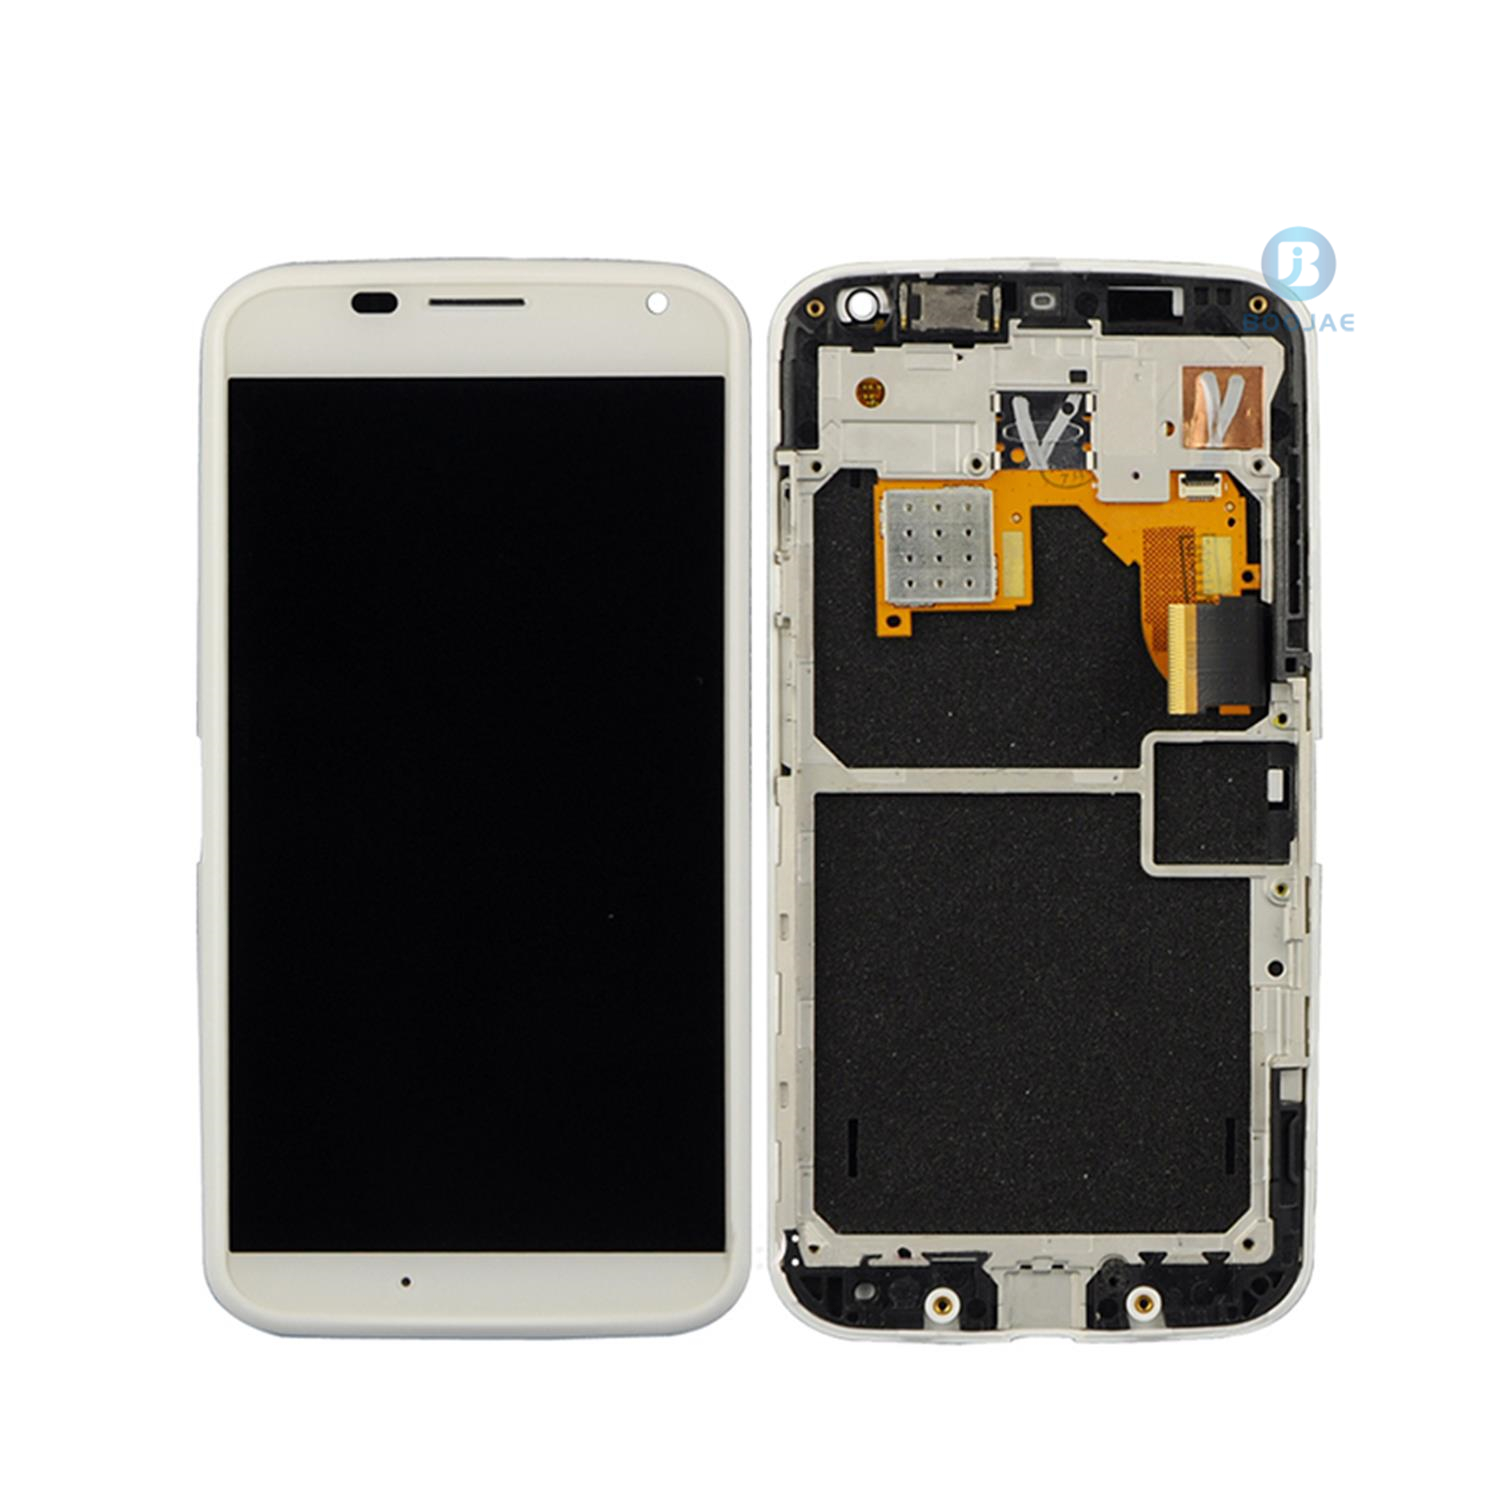 Motorola Moto X LCD Screen Display, Lcd Assembly Replacement